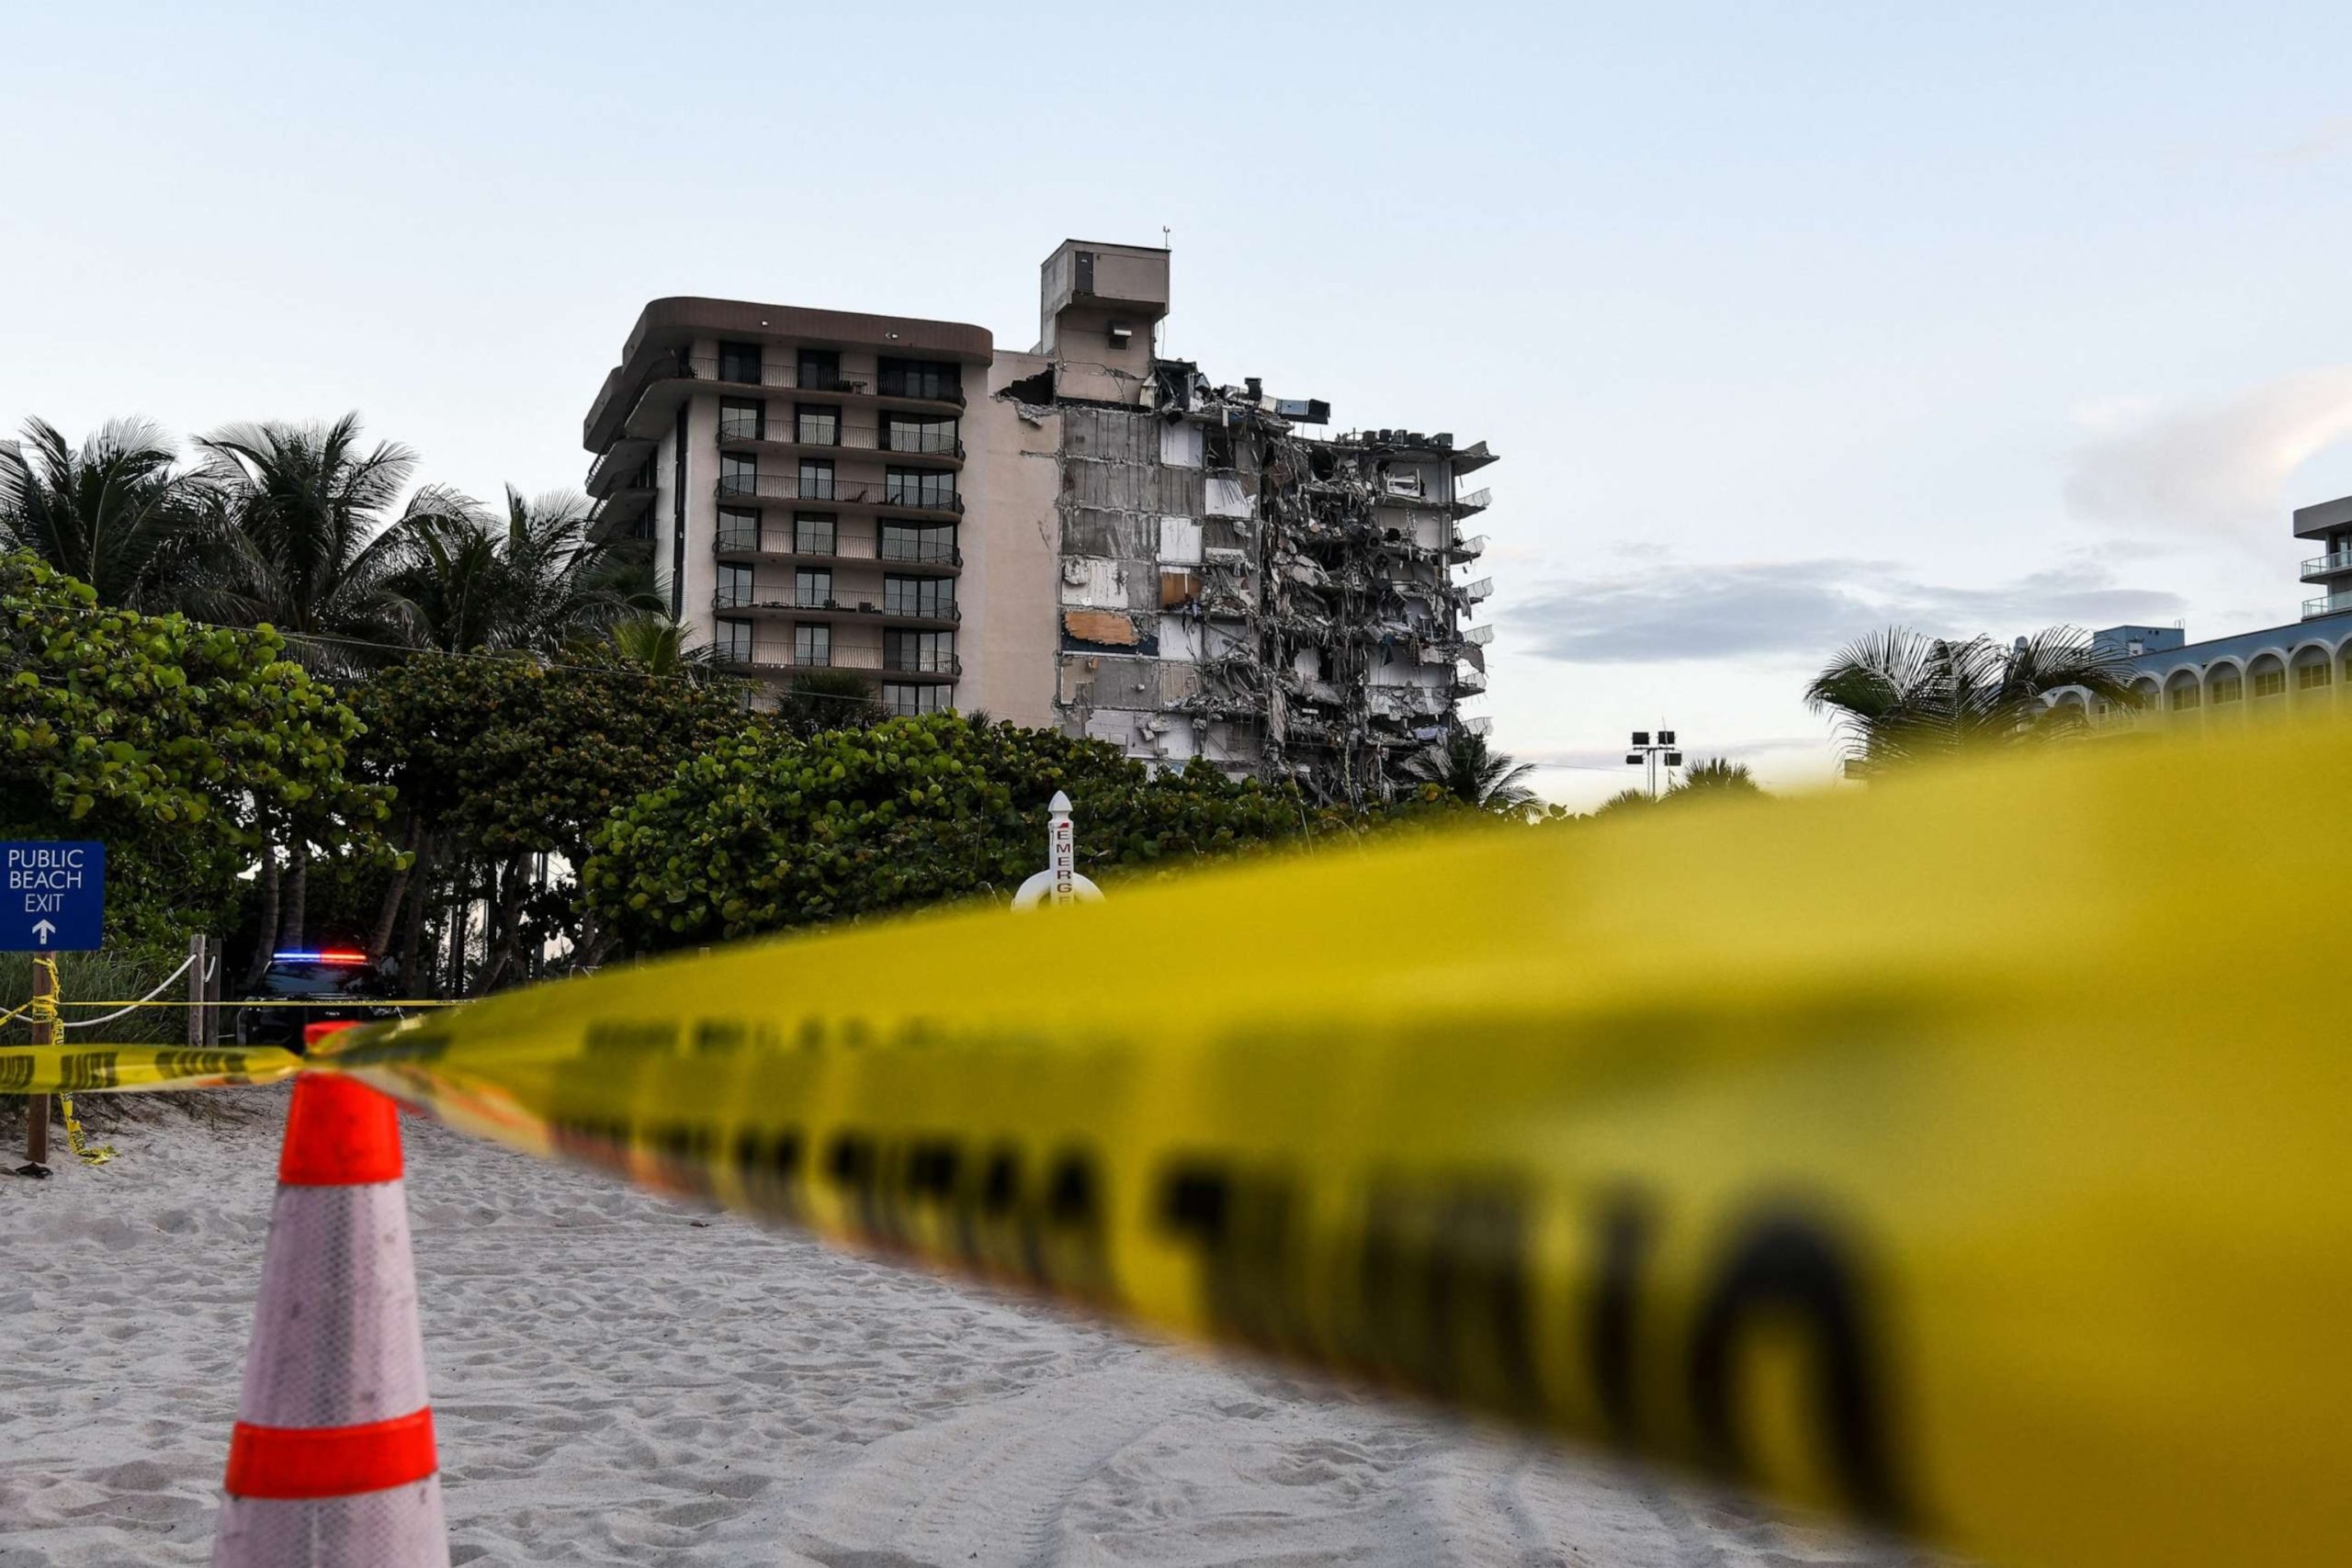 Investigators Find Deviations in Pool Deck Construction at Surfside Condo Collapse Site